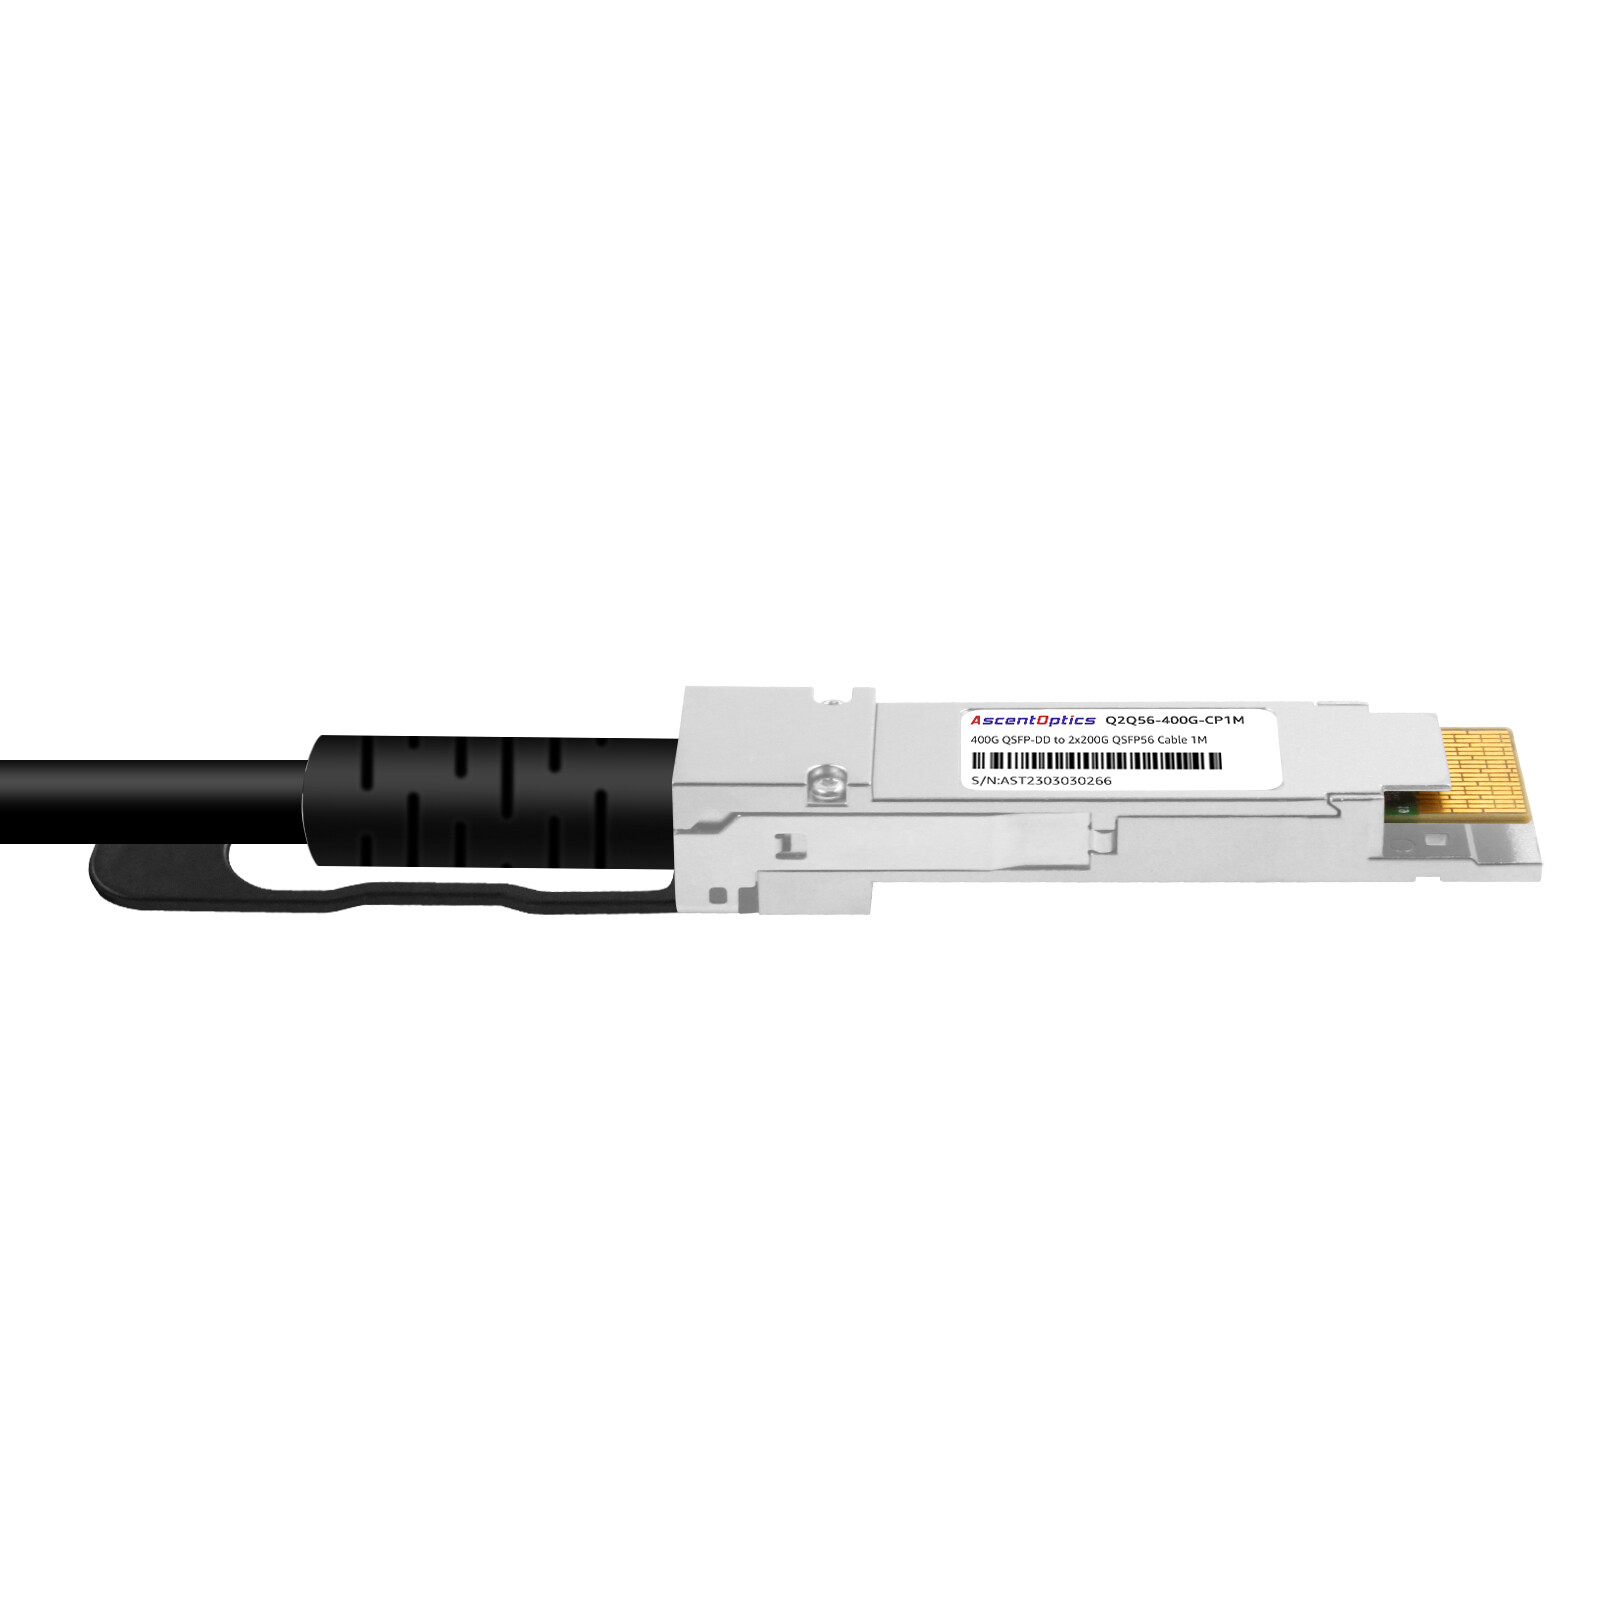 400G QSFP-DD to 2x 200G QSFP56 Copper Breakout Cable,1 Meter,Passive